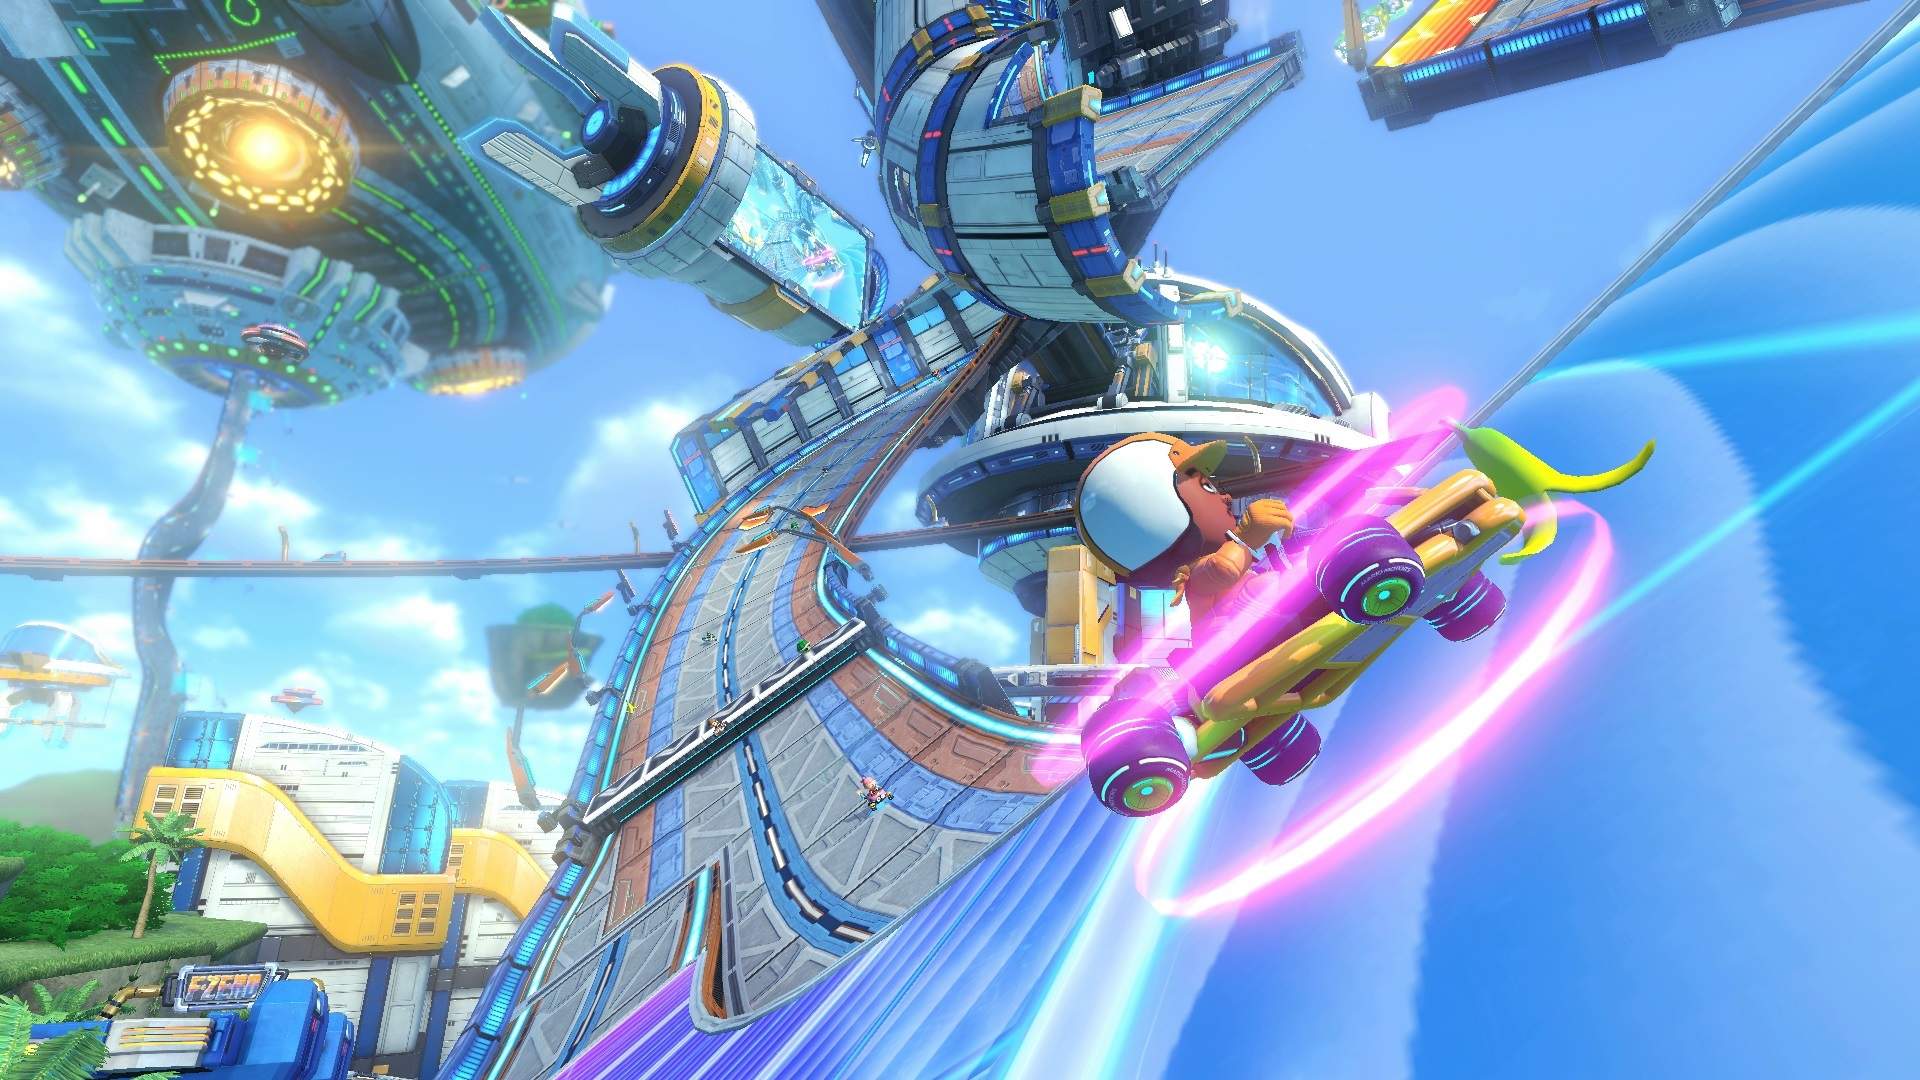 Mario Kart 8 Deluxe Boost Tips to Slipstream, Jump Boost